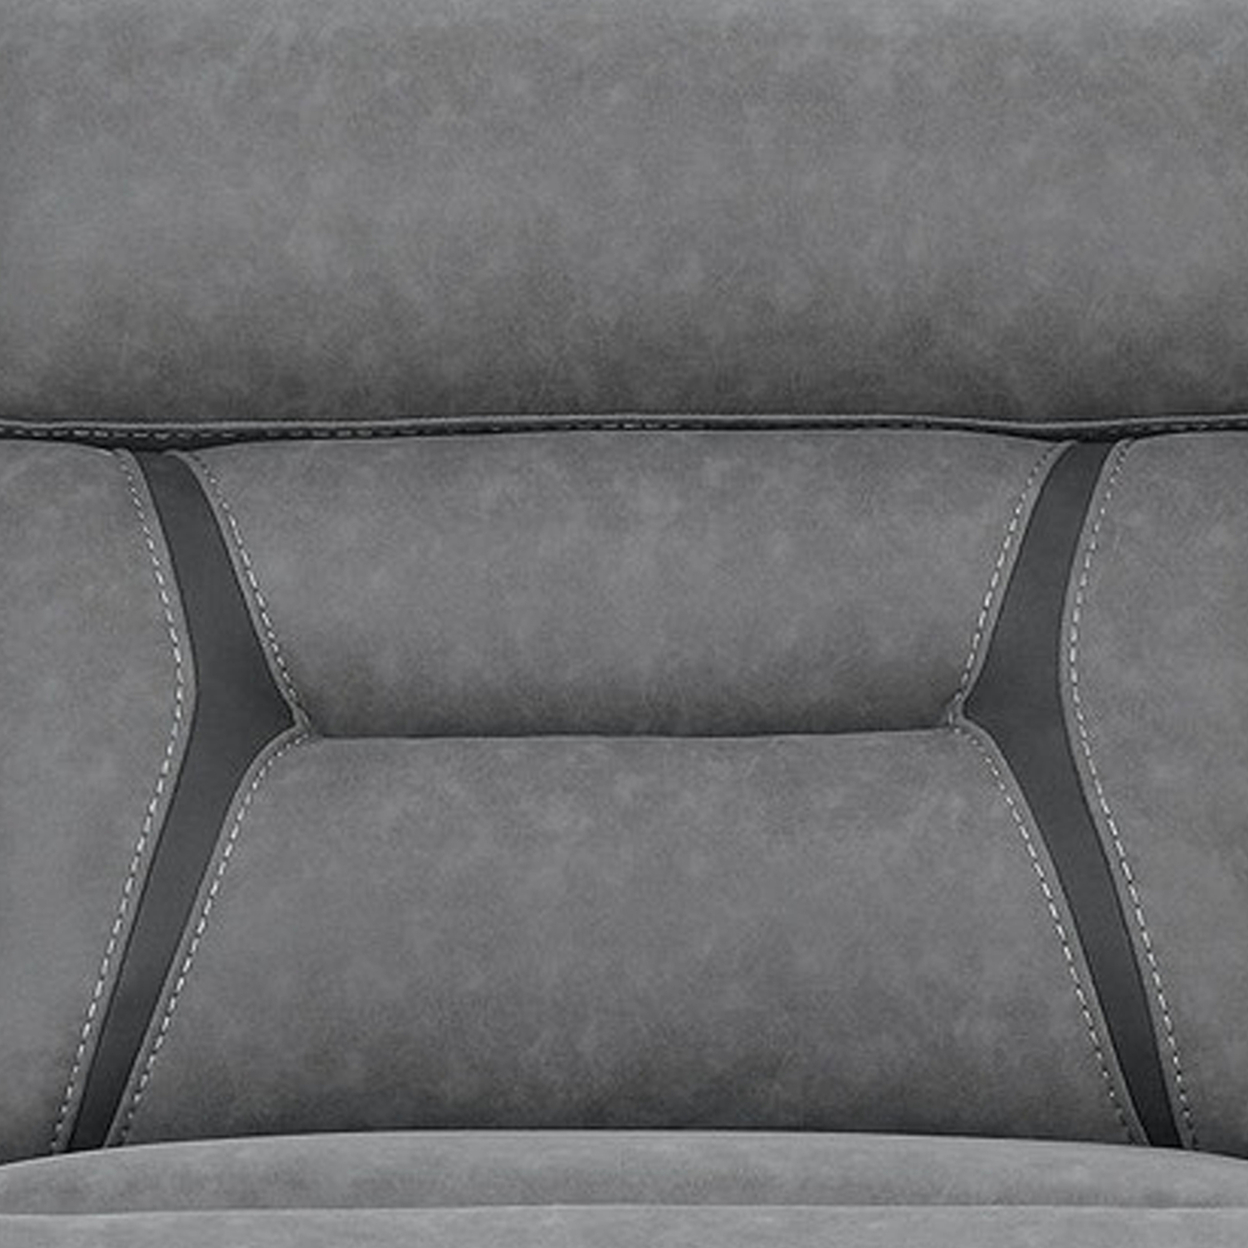 Leatherette Armless Chair With Stitched Details And Tufted Back, Gray- Saltoro Sherpi